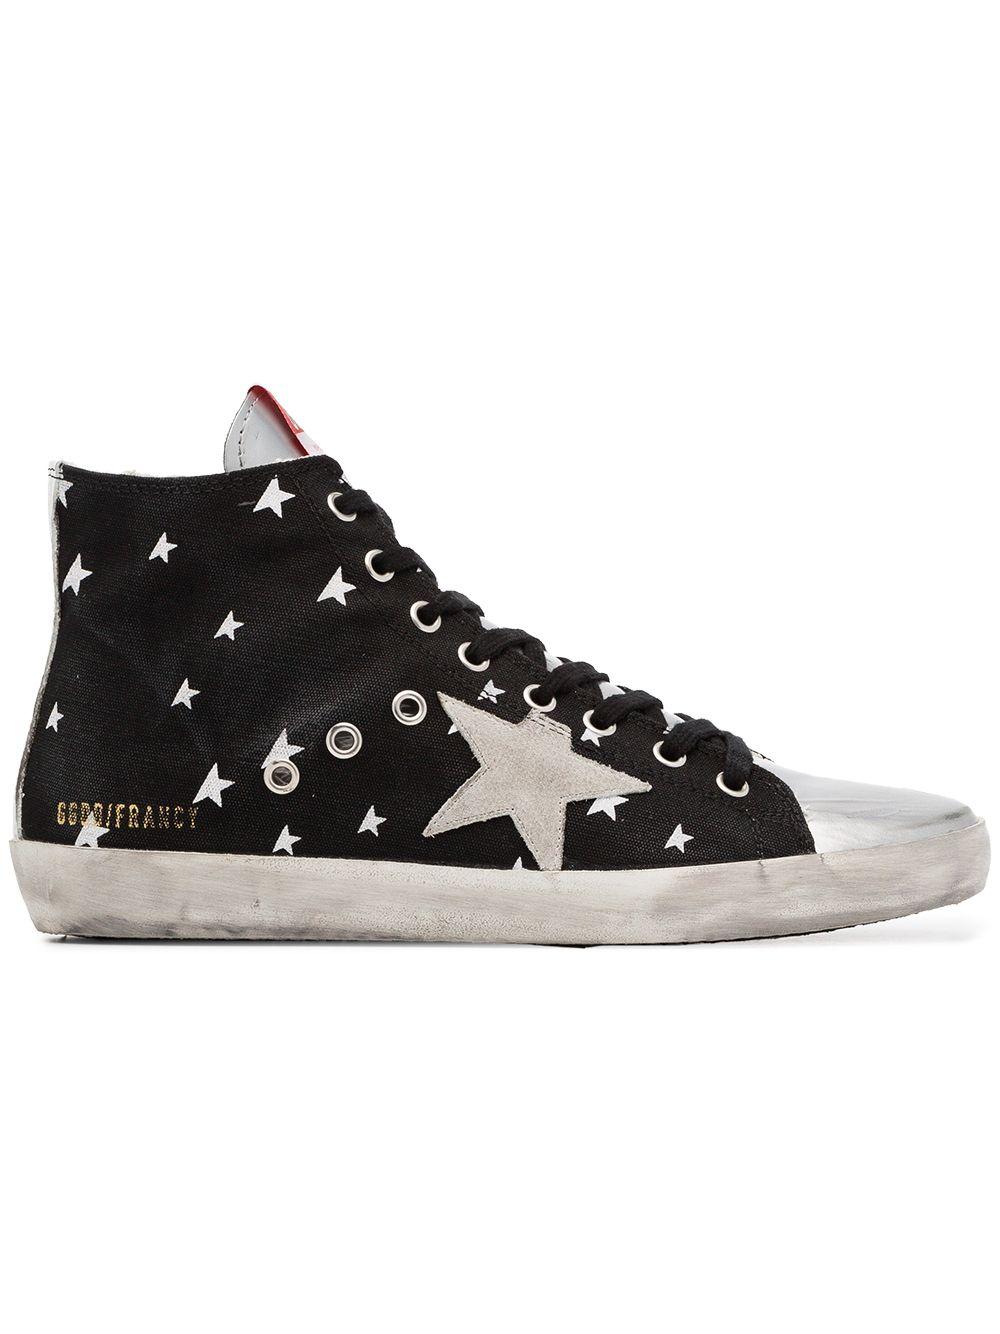 Golden Goose Deluxe Brand Goose Lace-up Francy Sneakers in Black White ...